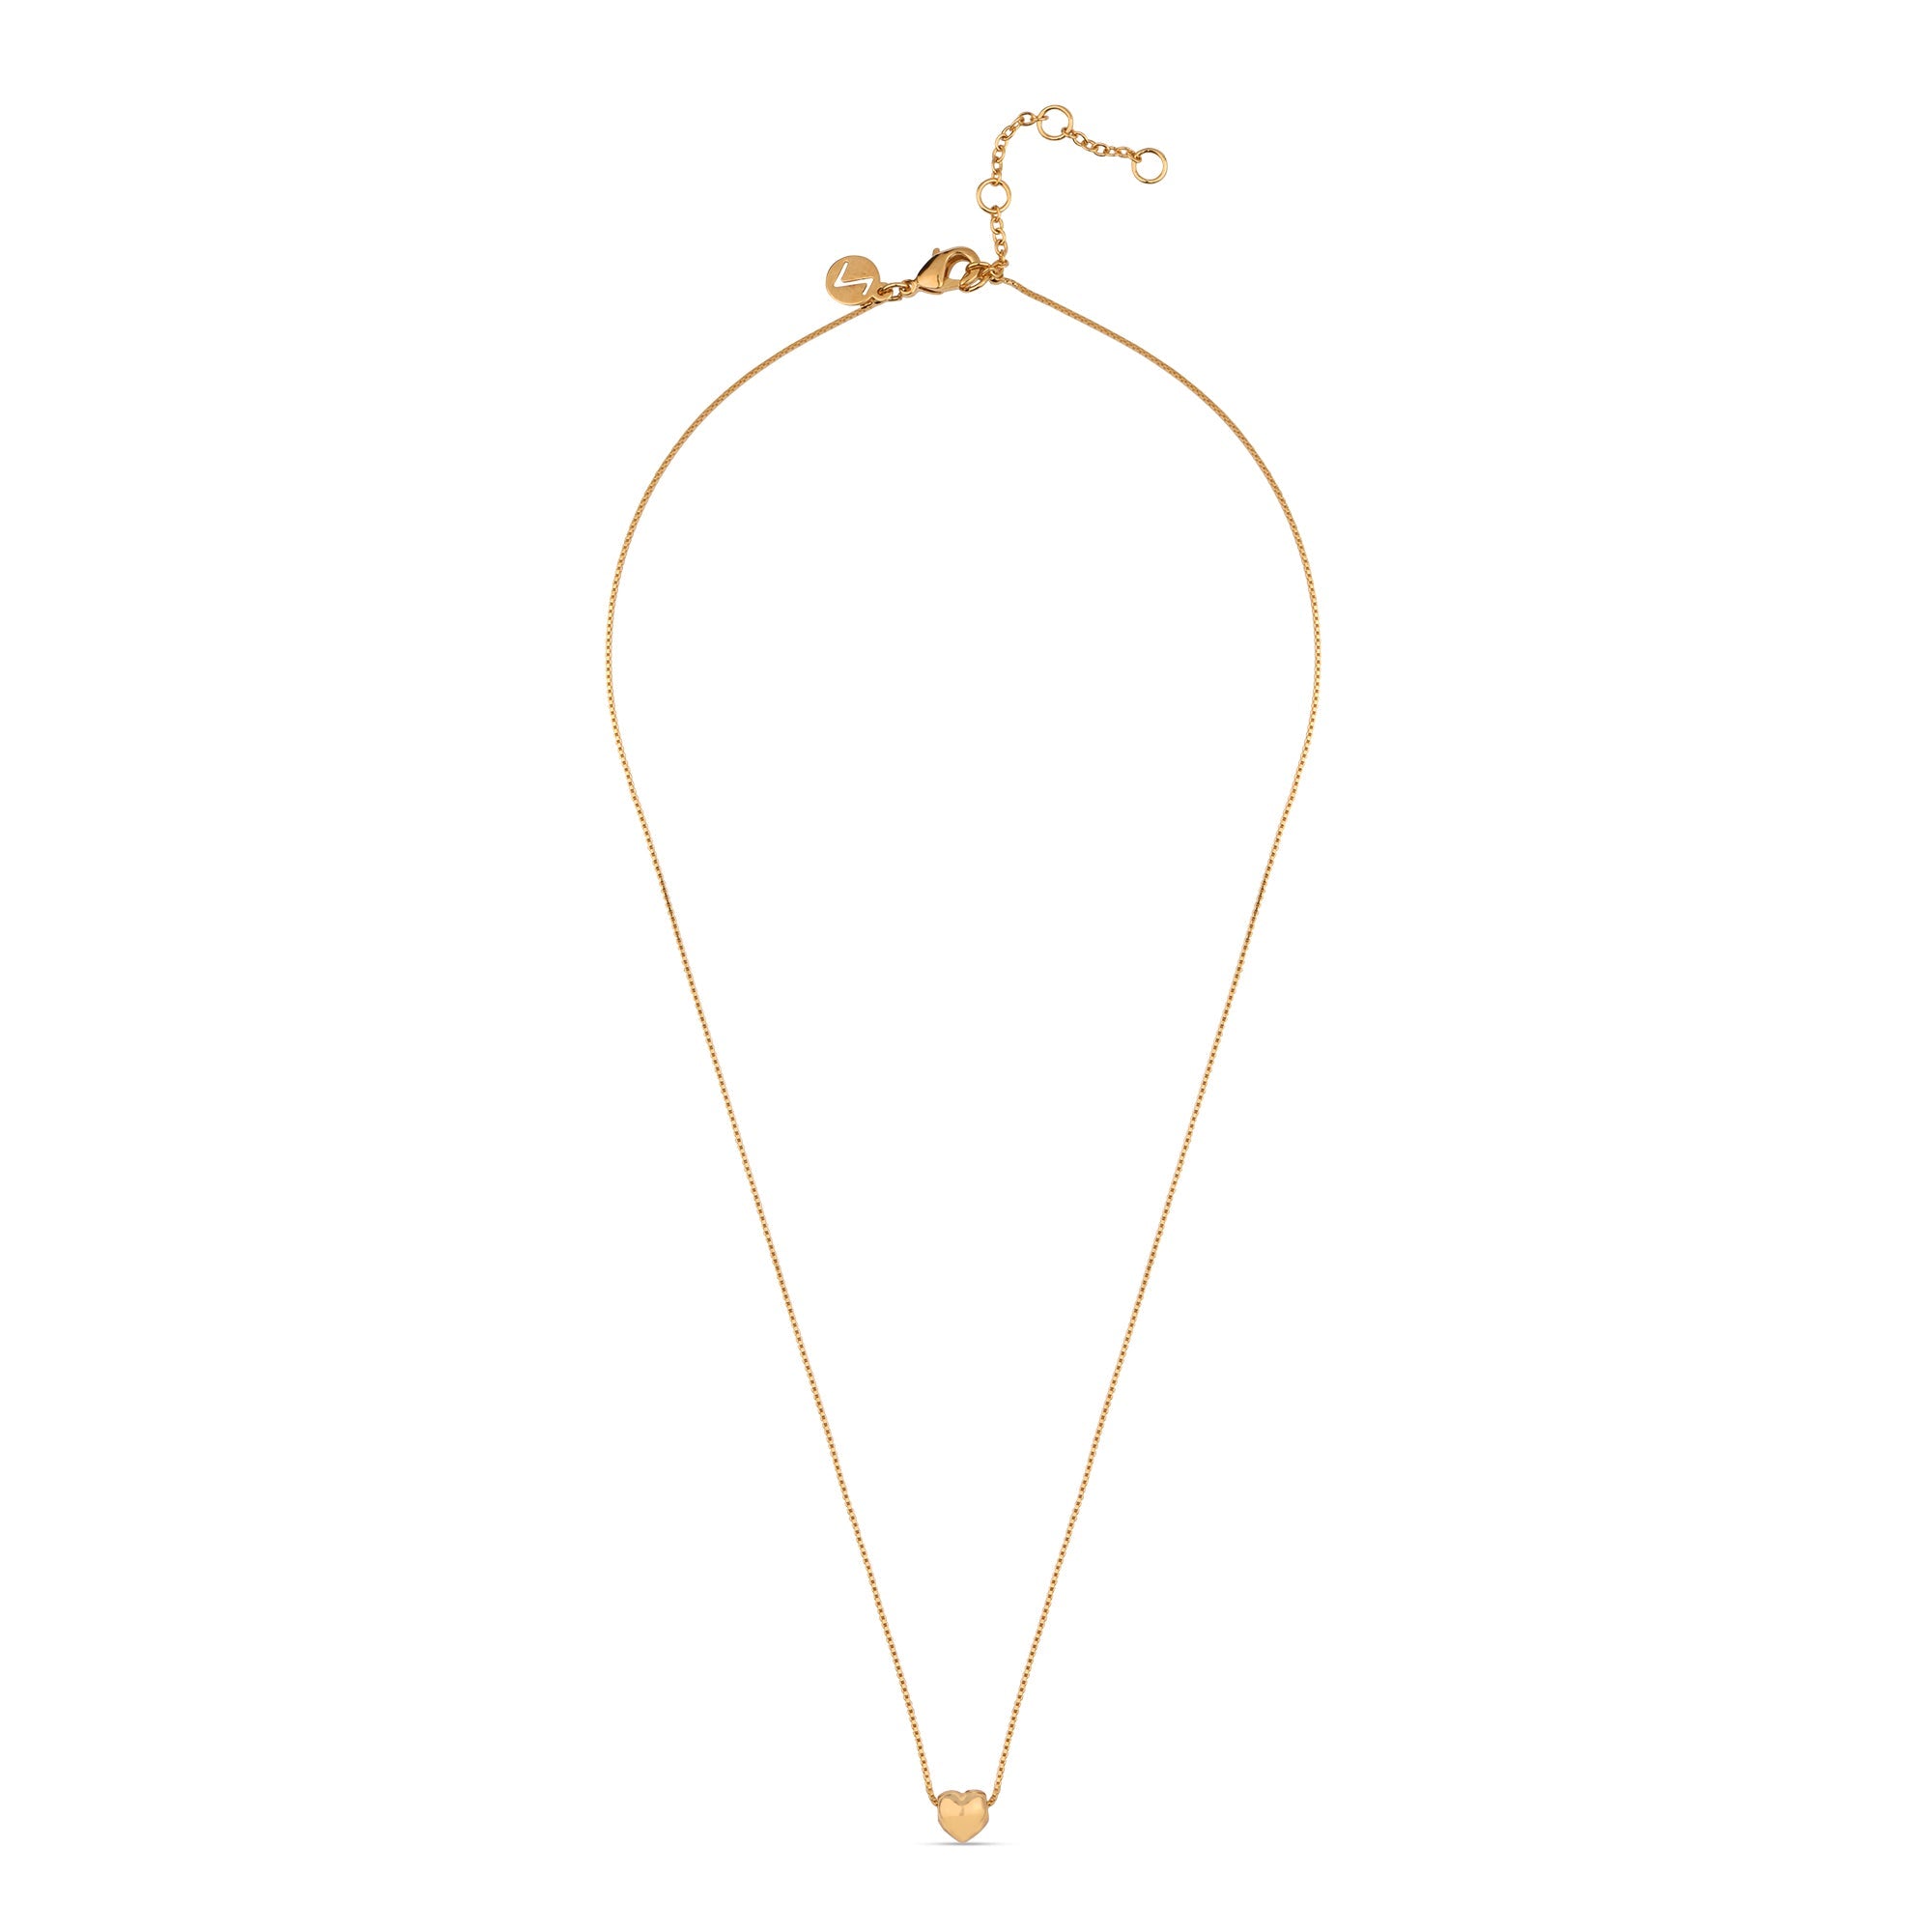 Real Gold Plated Z Mini Puff Heart Necklace For Women By Accessorize London